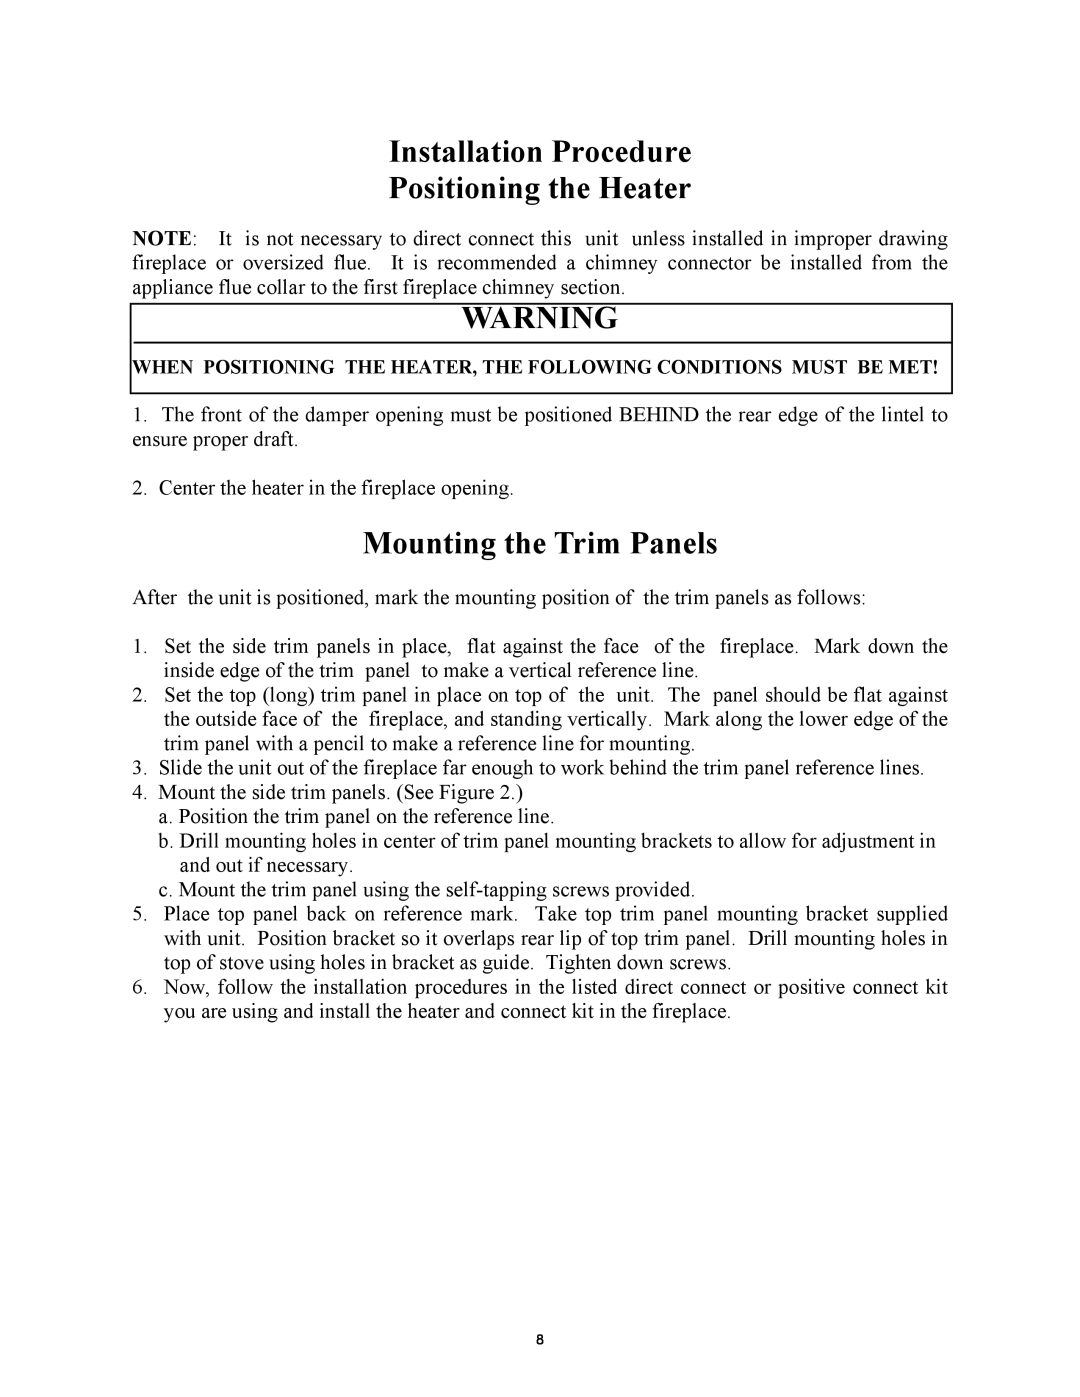 New Buck Corporation 81 installation instructions Installation Procedure Positioning the Heater, Mounting the Trim Panels 